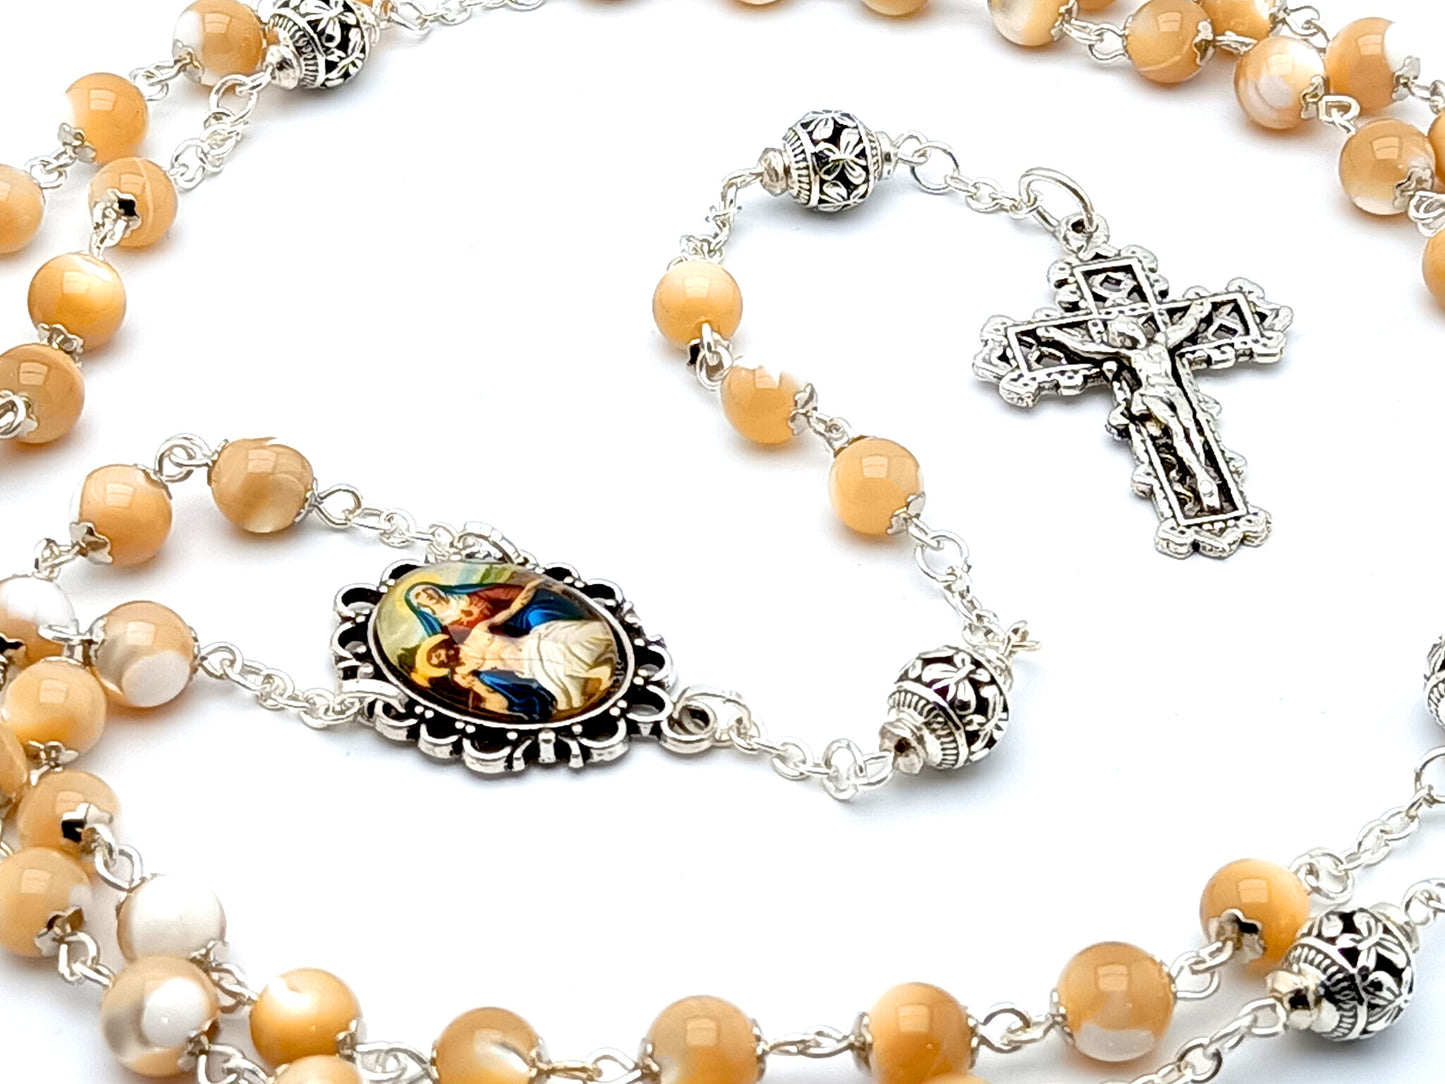 La Pieta unique rosary beads with mother of pearl and silver beads, silver crucifix and picture centre medal.